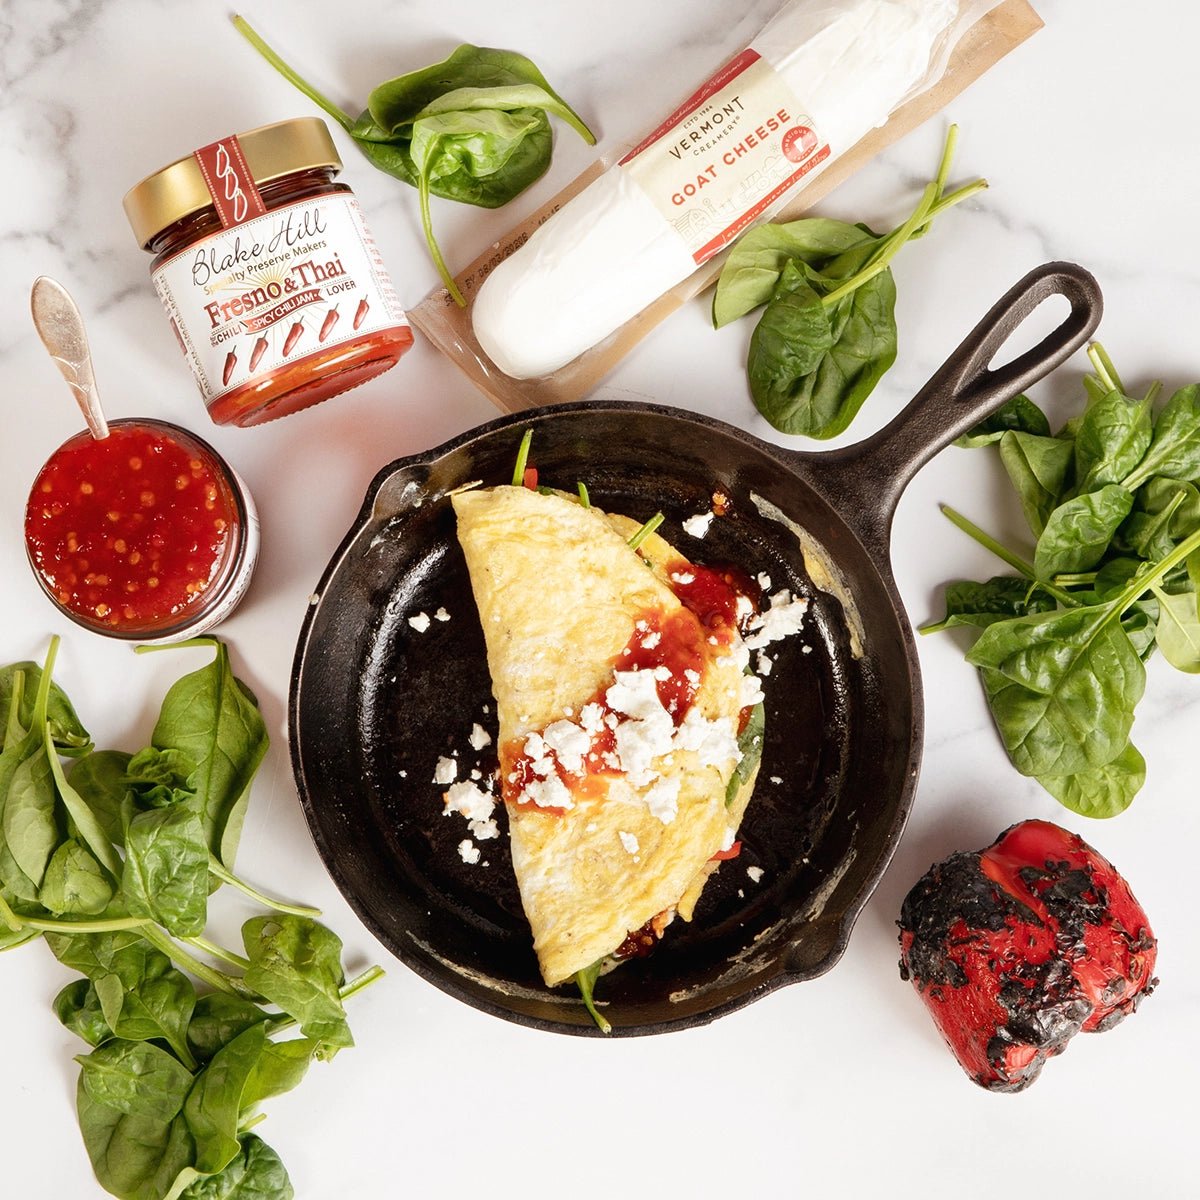 Omelette topped with Blake Hill Preserves Fresno & Thai Spicy Chili jam.